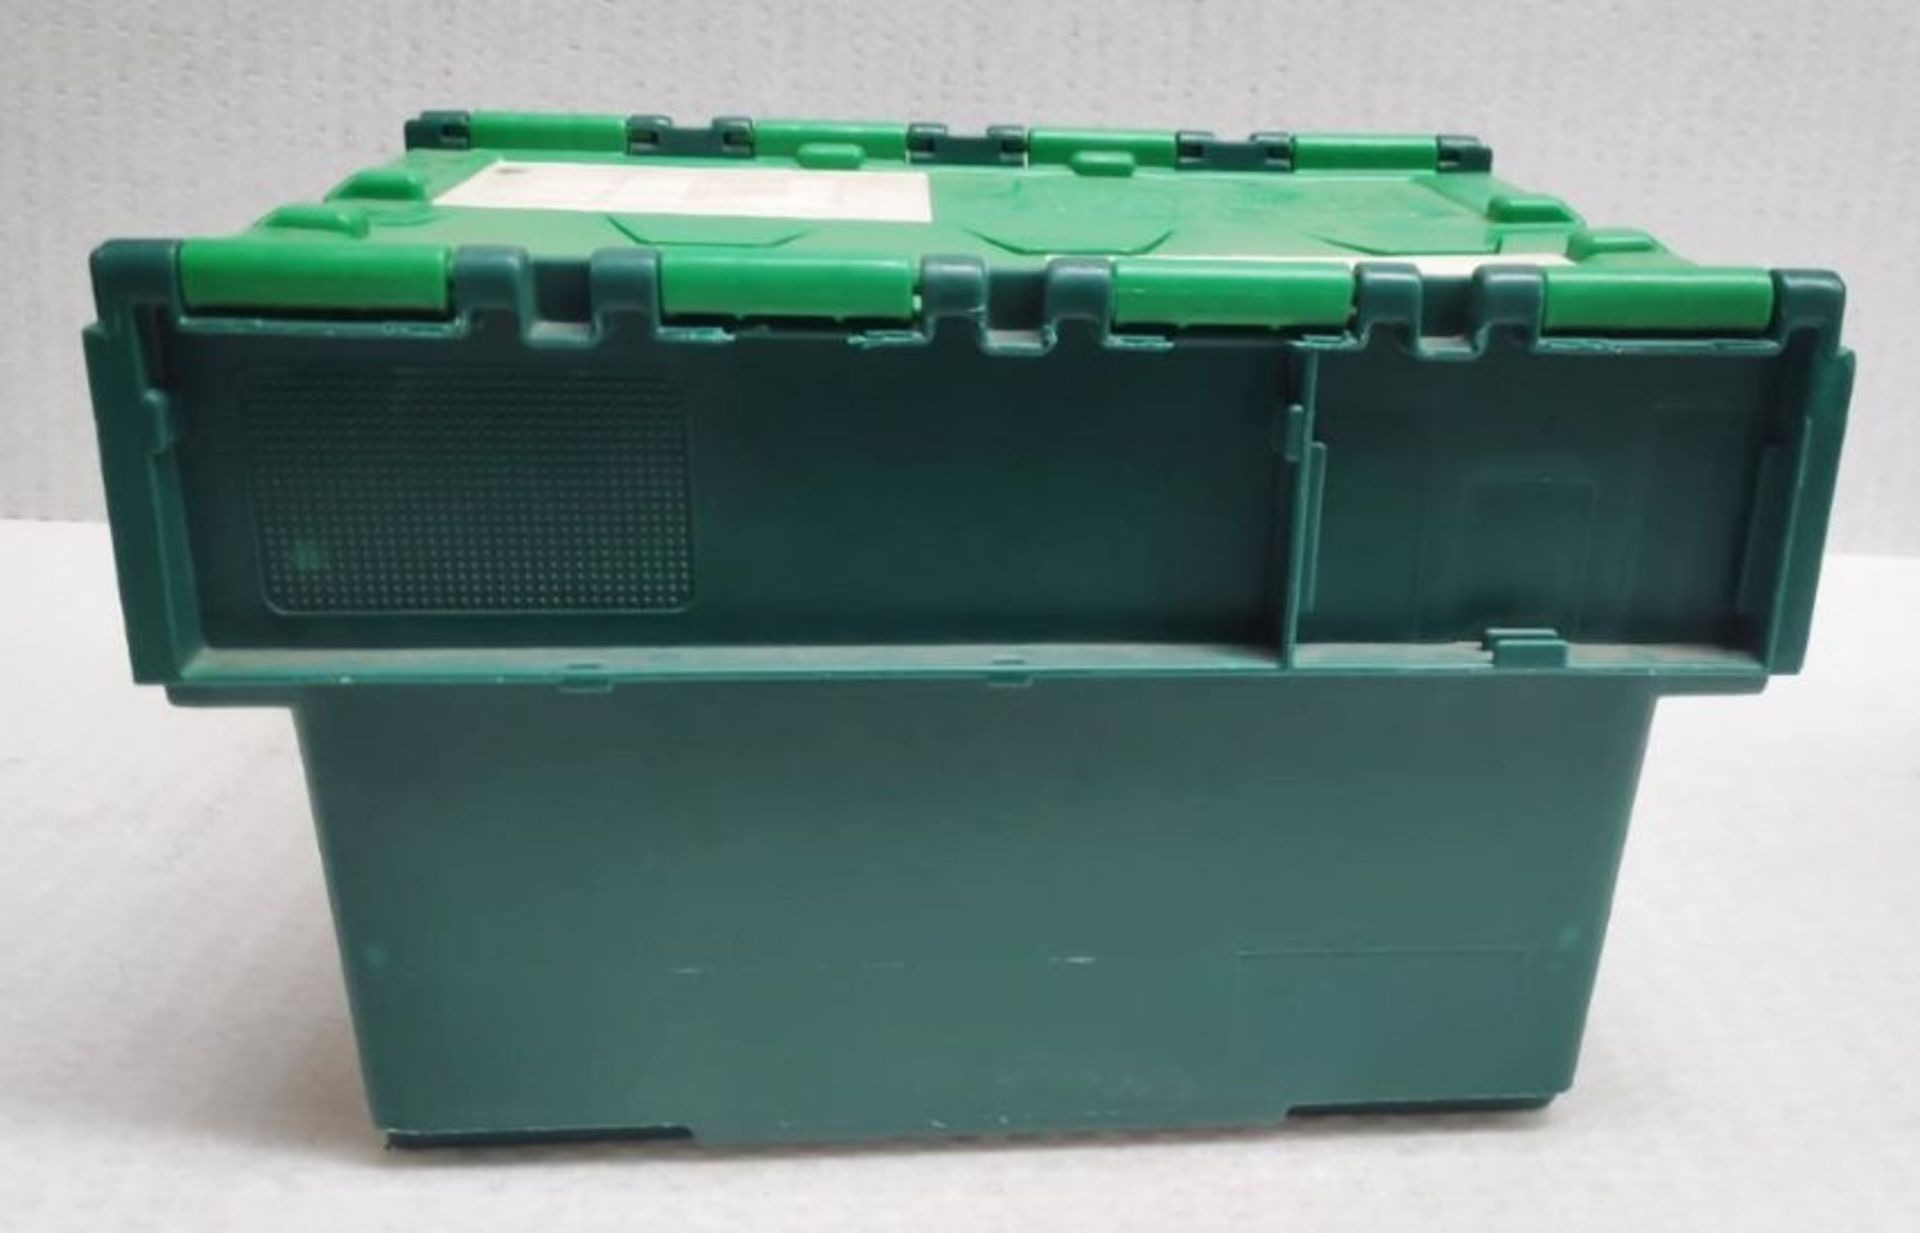 20 x Robust Compact Green Plastic Stackable Secure Storage Boxes With Attached Hinged Lids - - Image 3 of 6